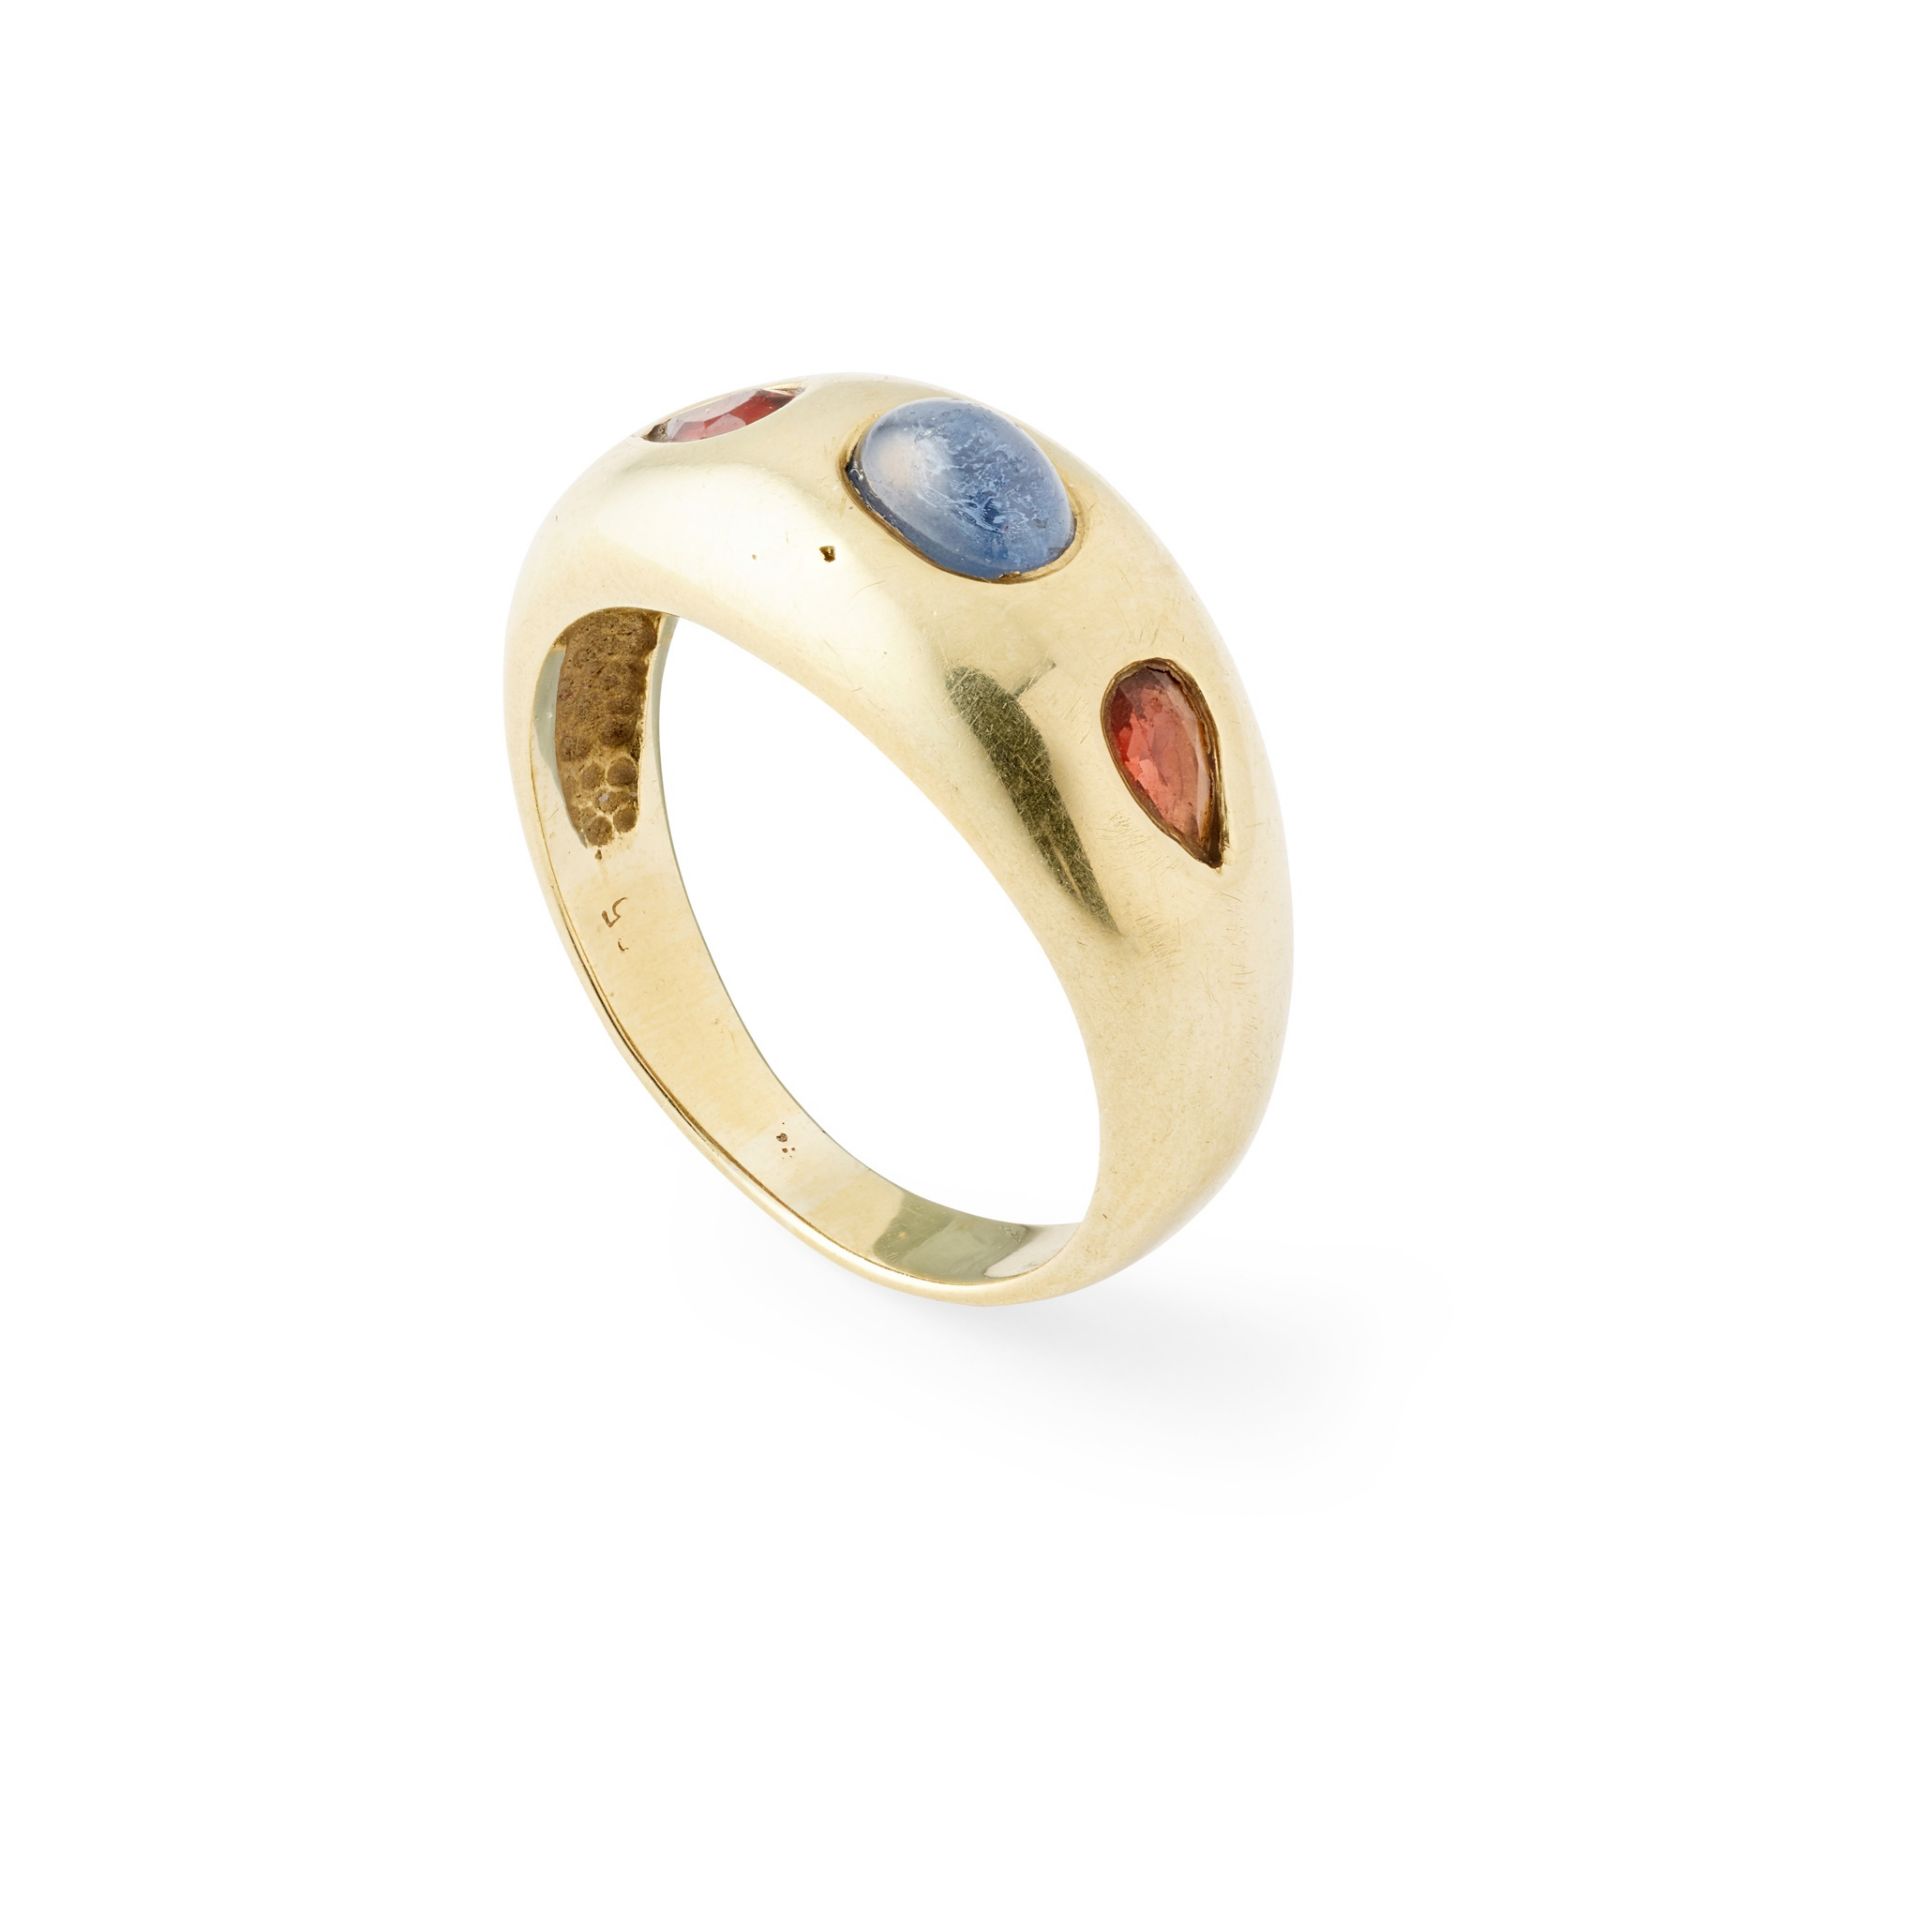 A sapphire and garnet ring